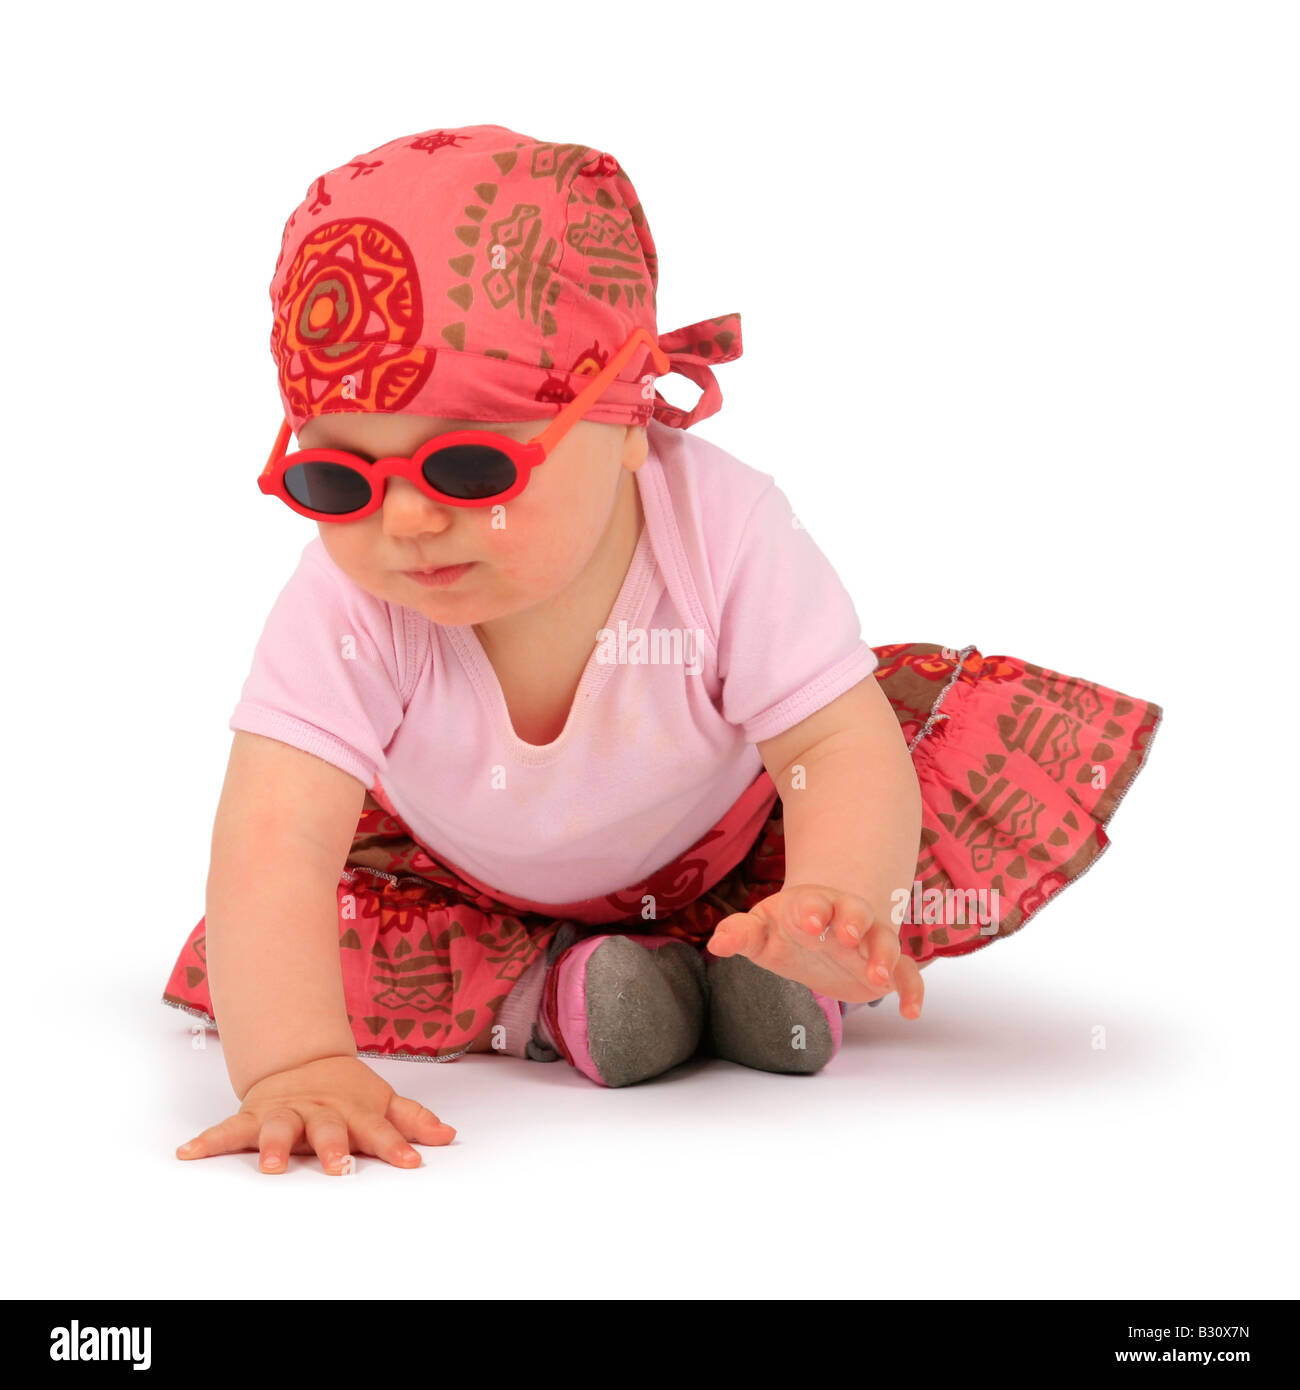 baby with sunglasses crawling Stock Photo